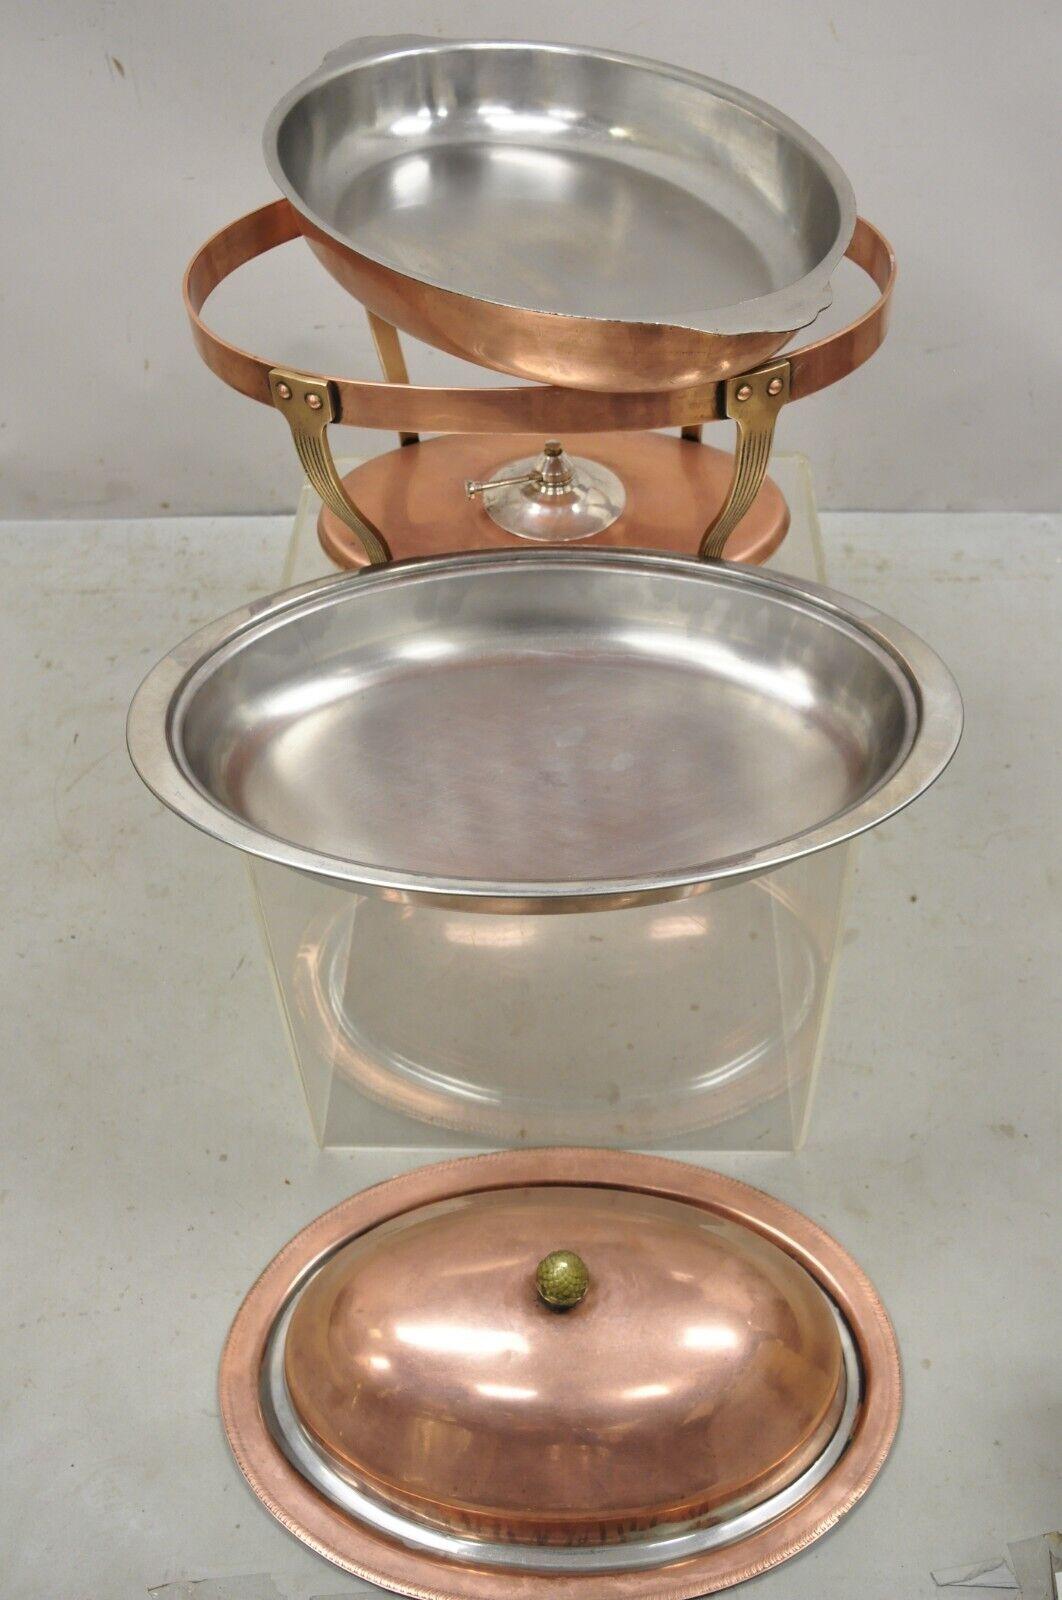 20th Century Vtg Legion Utensils Copper & Brass Oval Chafing Dish Warming Tray Serving Pan